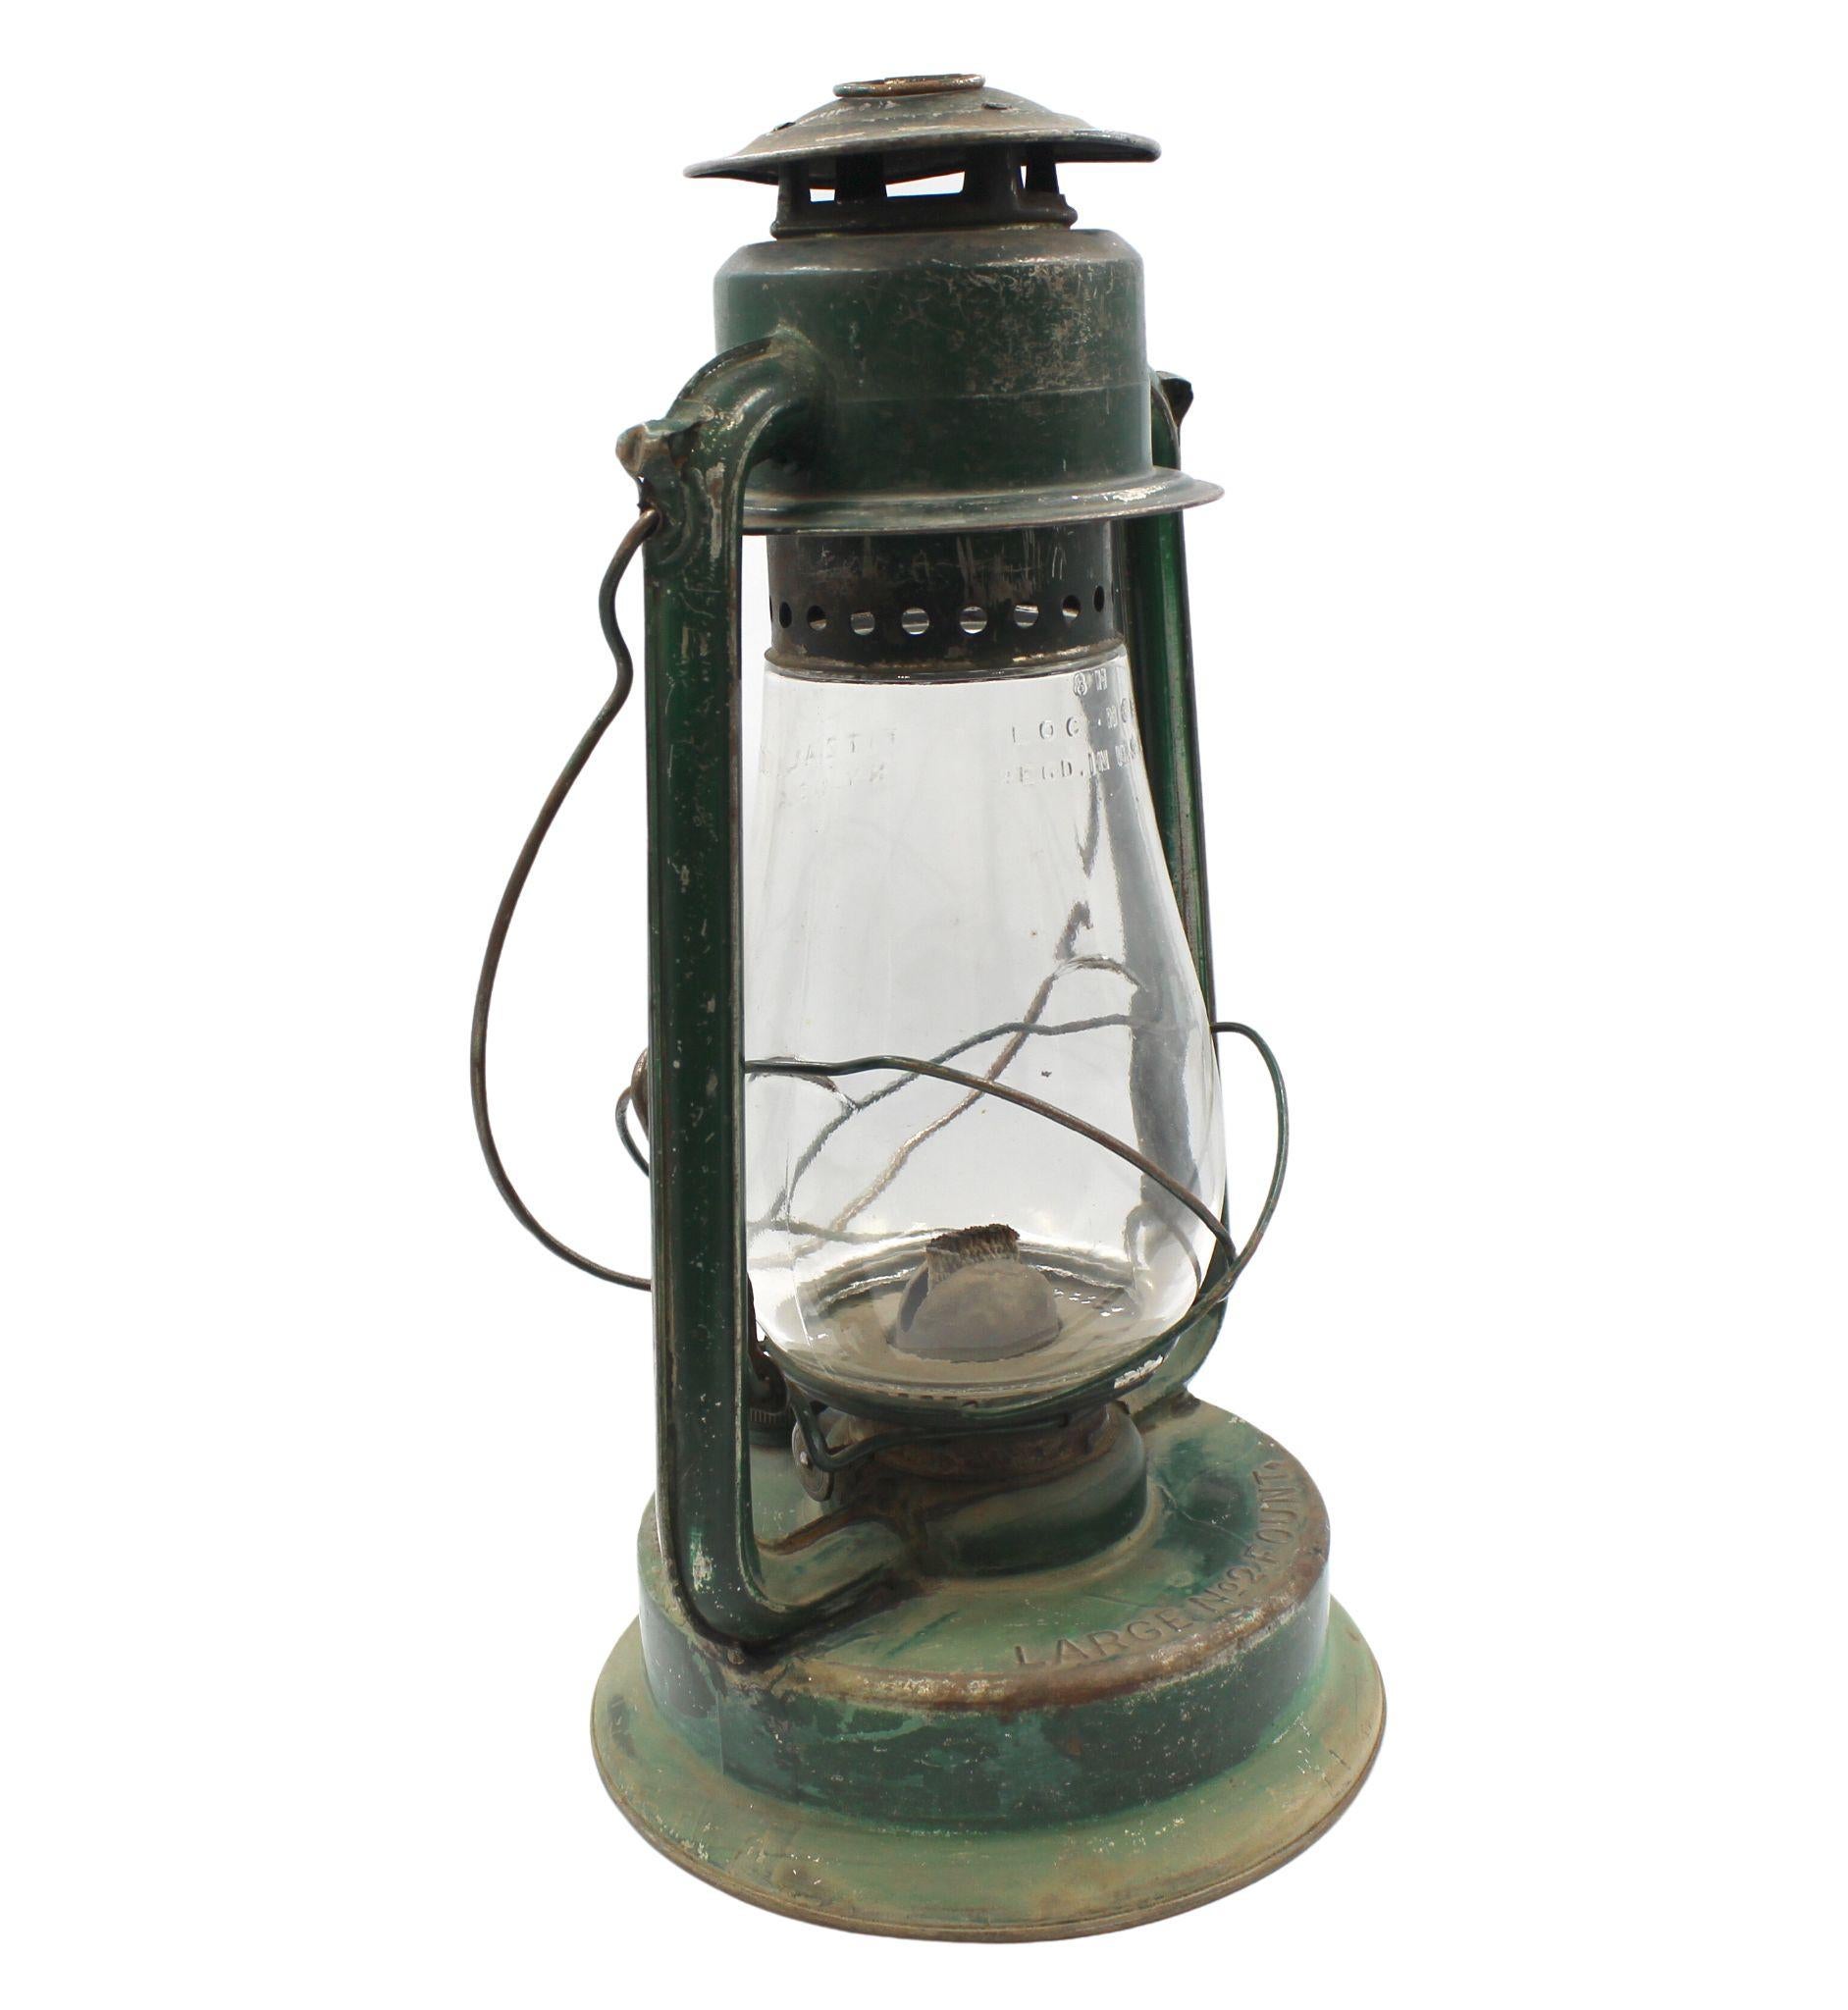 Presented is a vintage Paull's Leader Large No. 2 Fount kerosene lantern. This lantern design was first manufactured by the Wheeling Stamping company under the name 